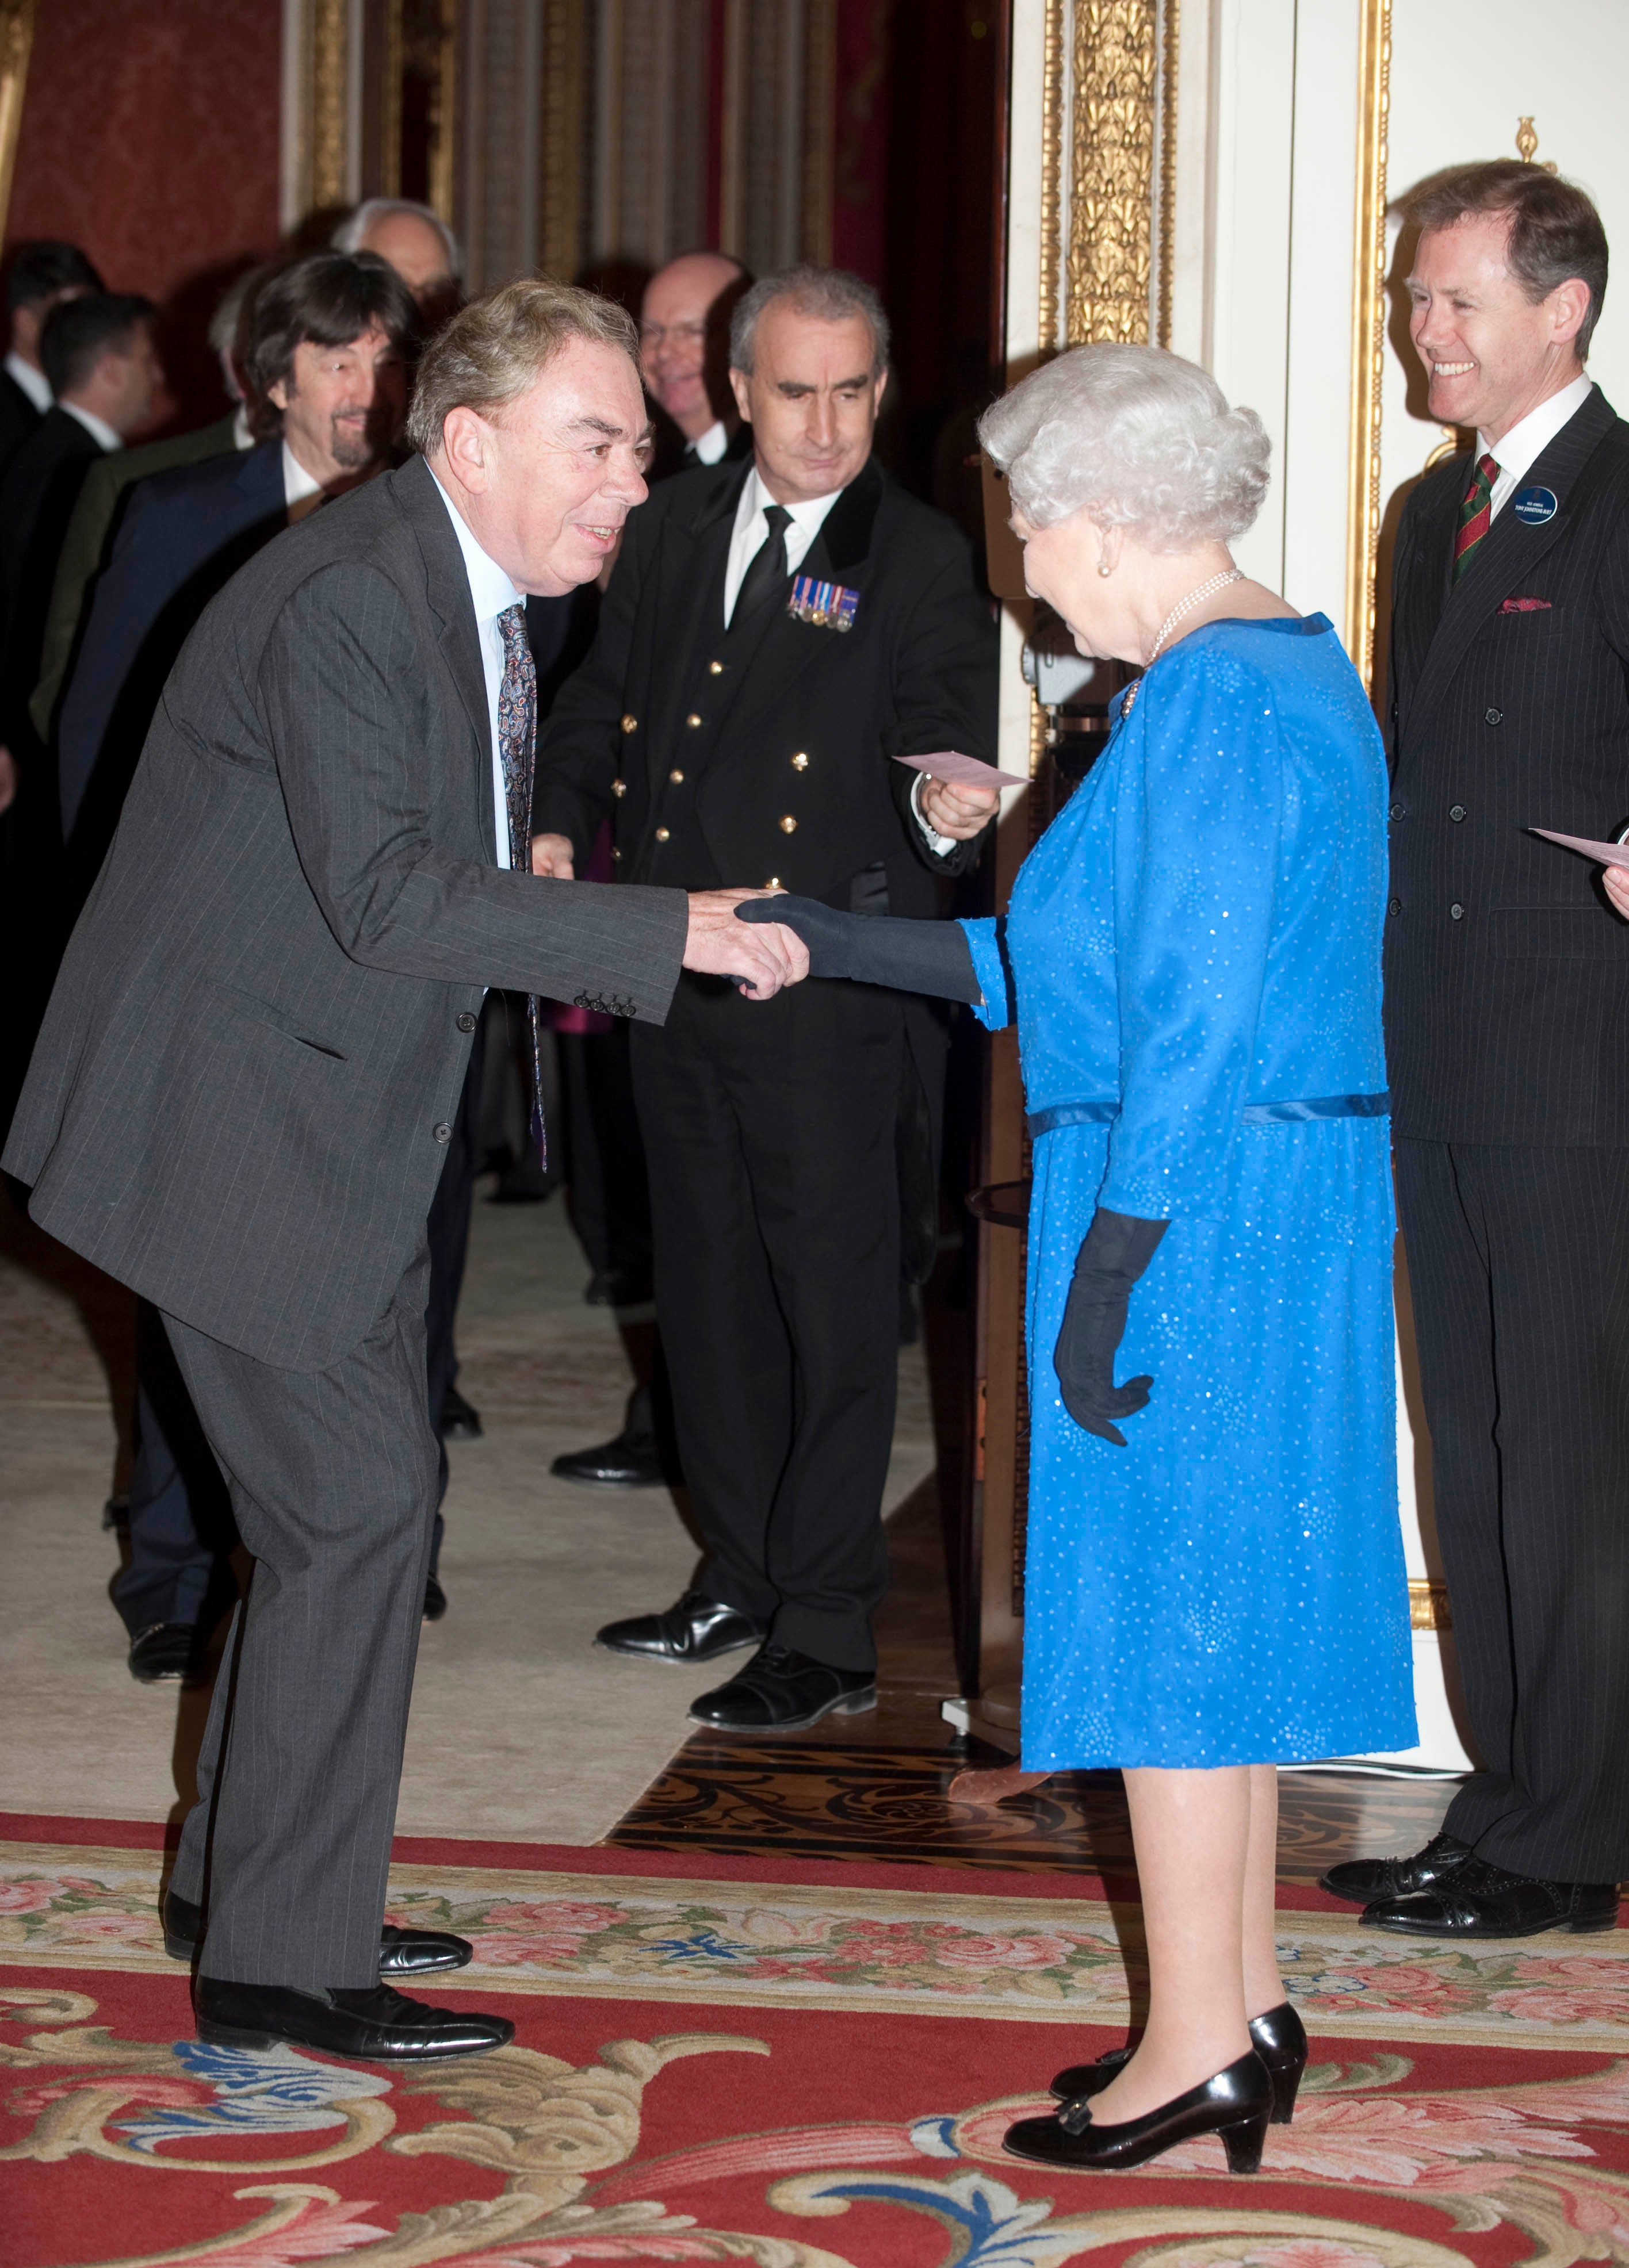 The Queen meets Andrew Lloyd Webber at Buckingham Palace in 2014 (David Crumb/Daily Mail/PA)